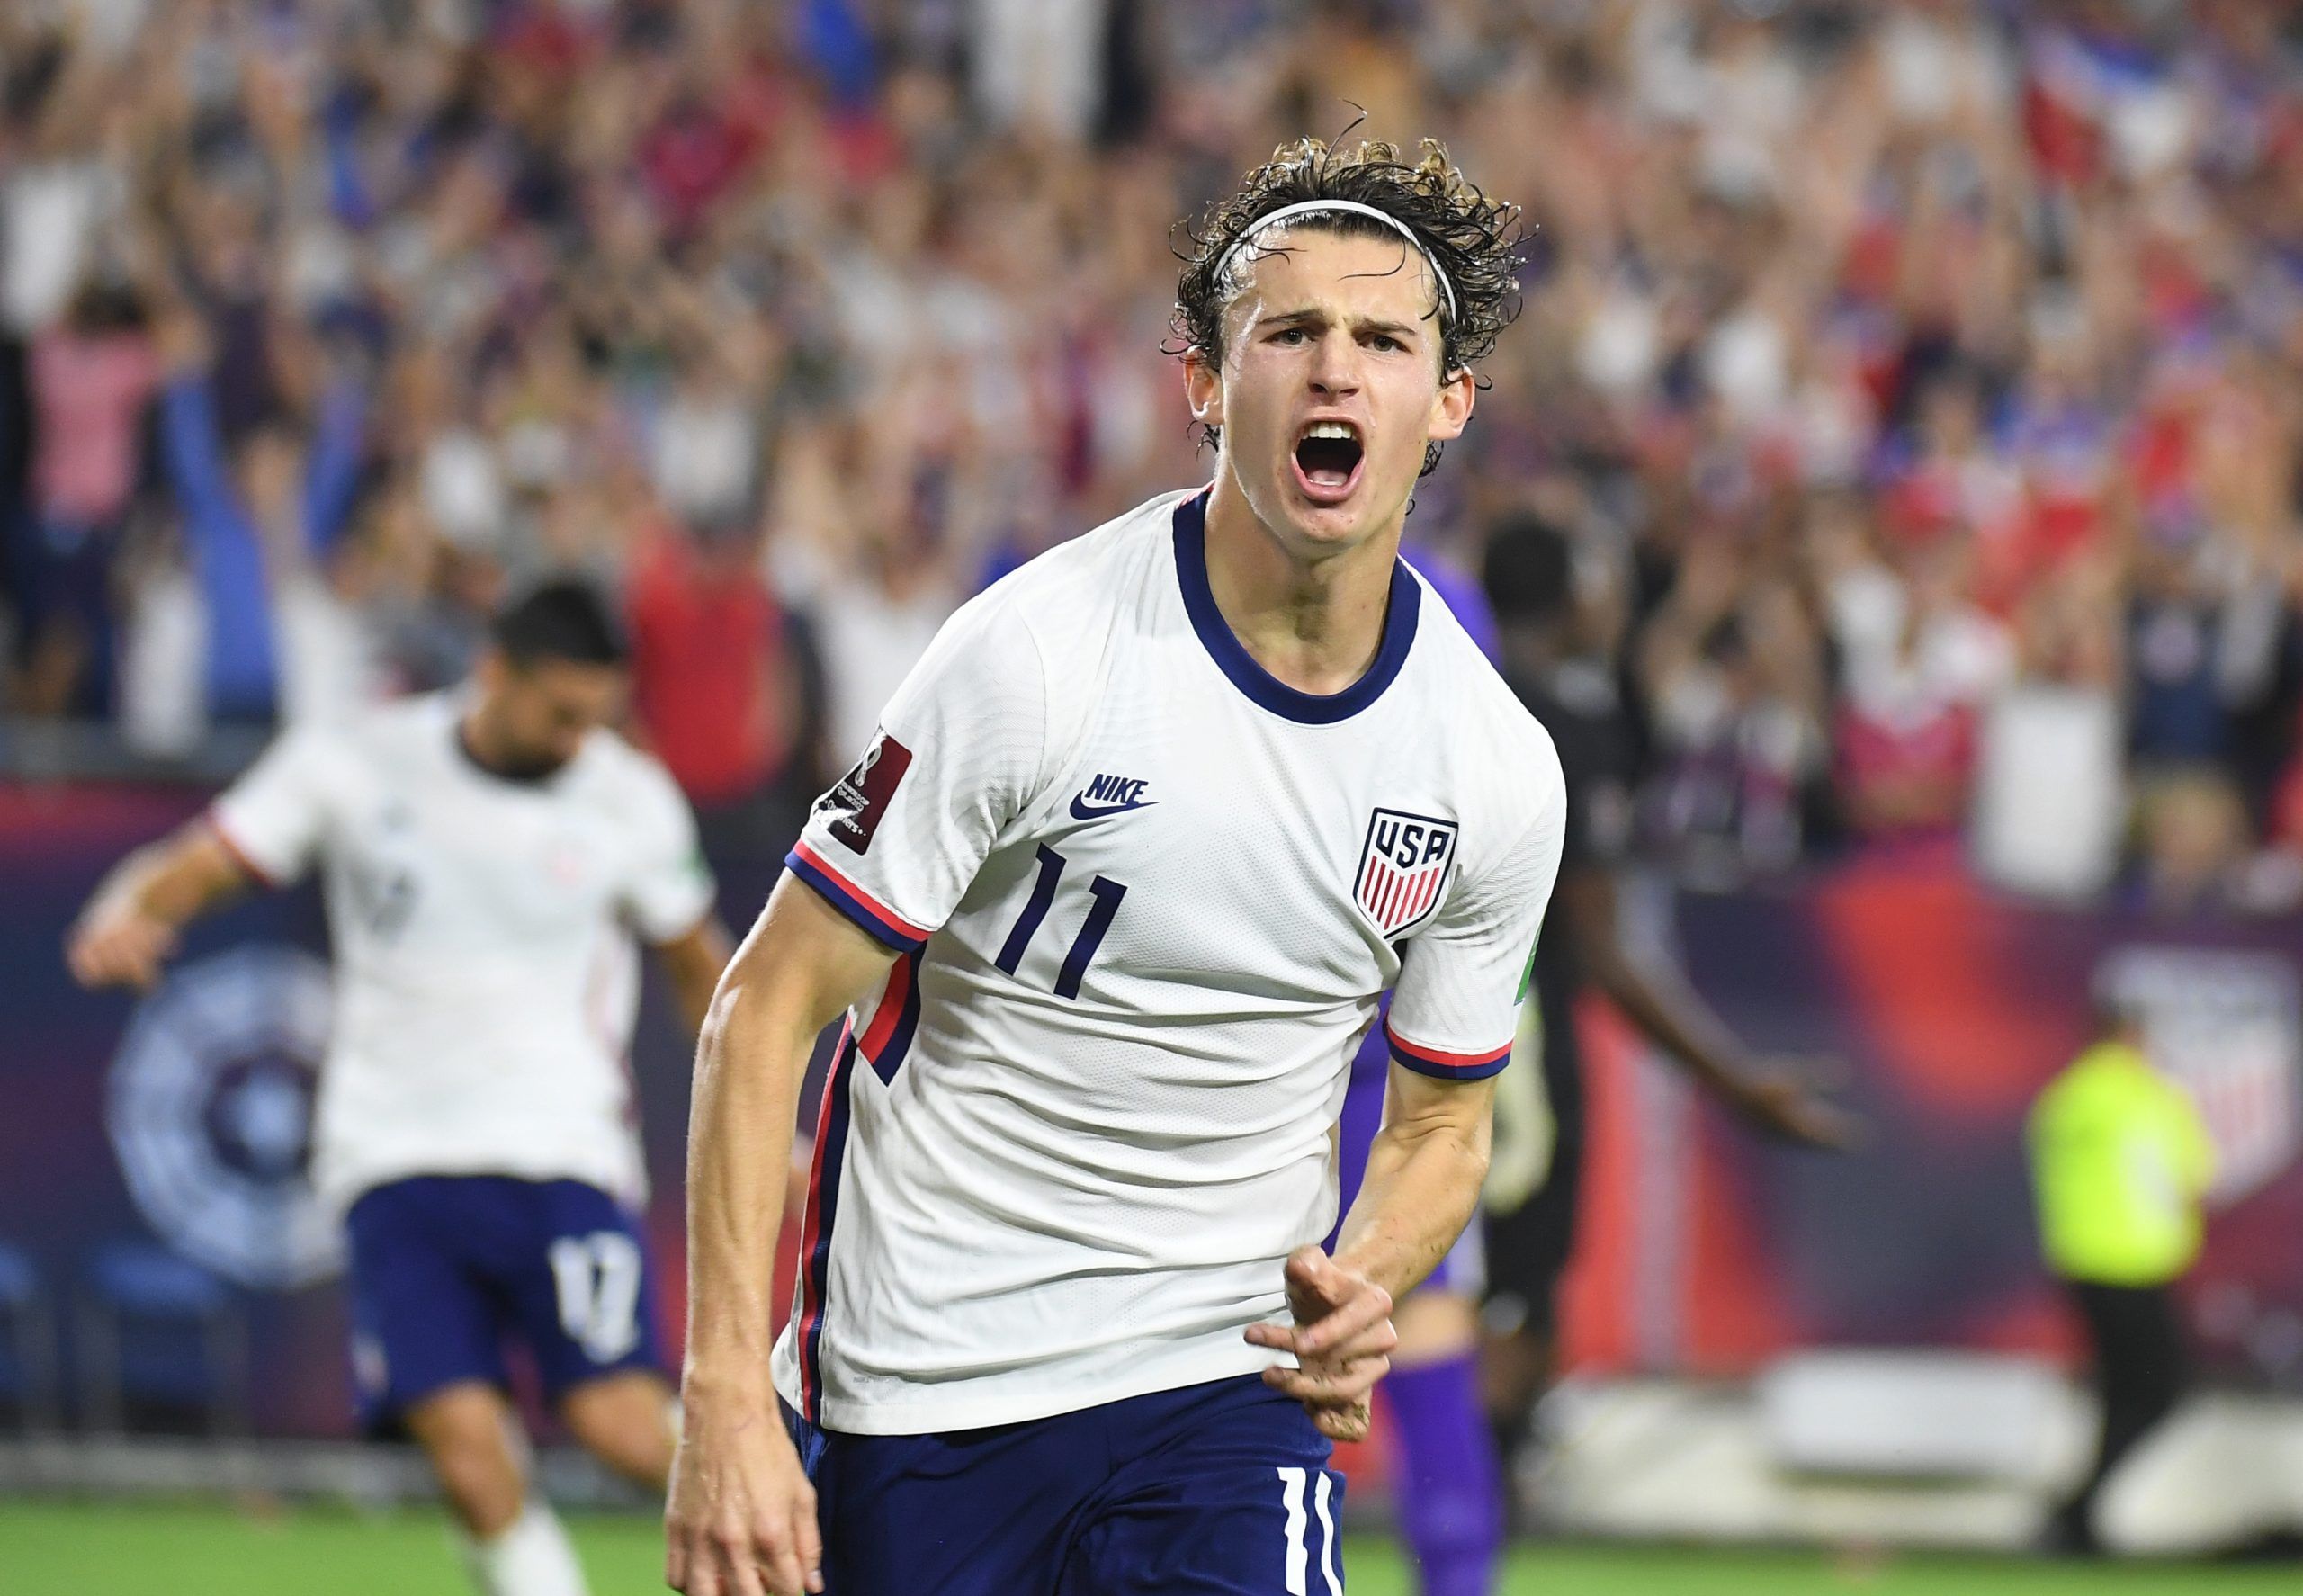 Sep 5, 2021; Nashville, Tennessee, USA; United States midfielder Brenden Aaronson (11) celebrates after scoring a goal in the second half against Canada during a CONCACAF FIFA World Cup Qualifier soccer match at Nissan Stadium. Mandatory Credit: Christopher Hanewinckel-USA TODAY Sports